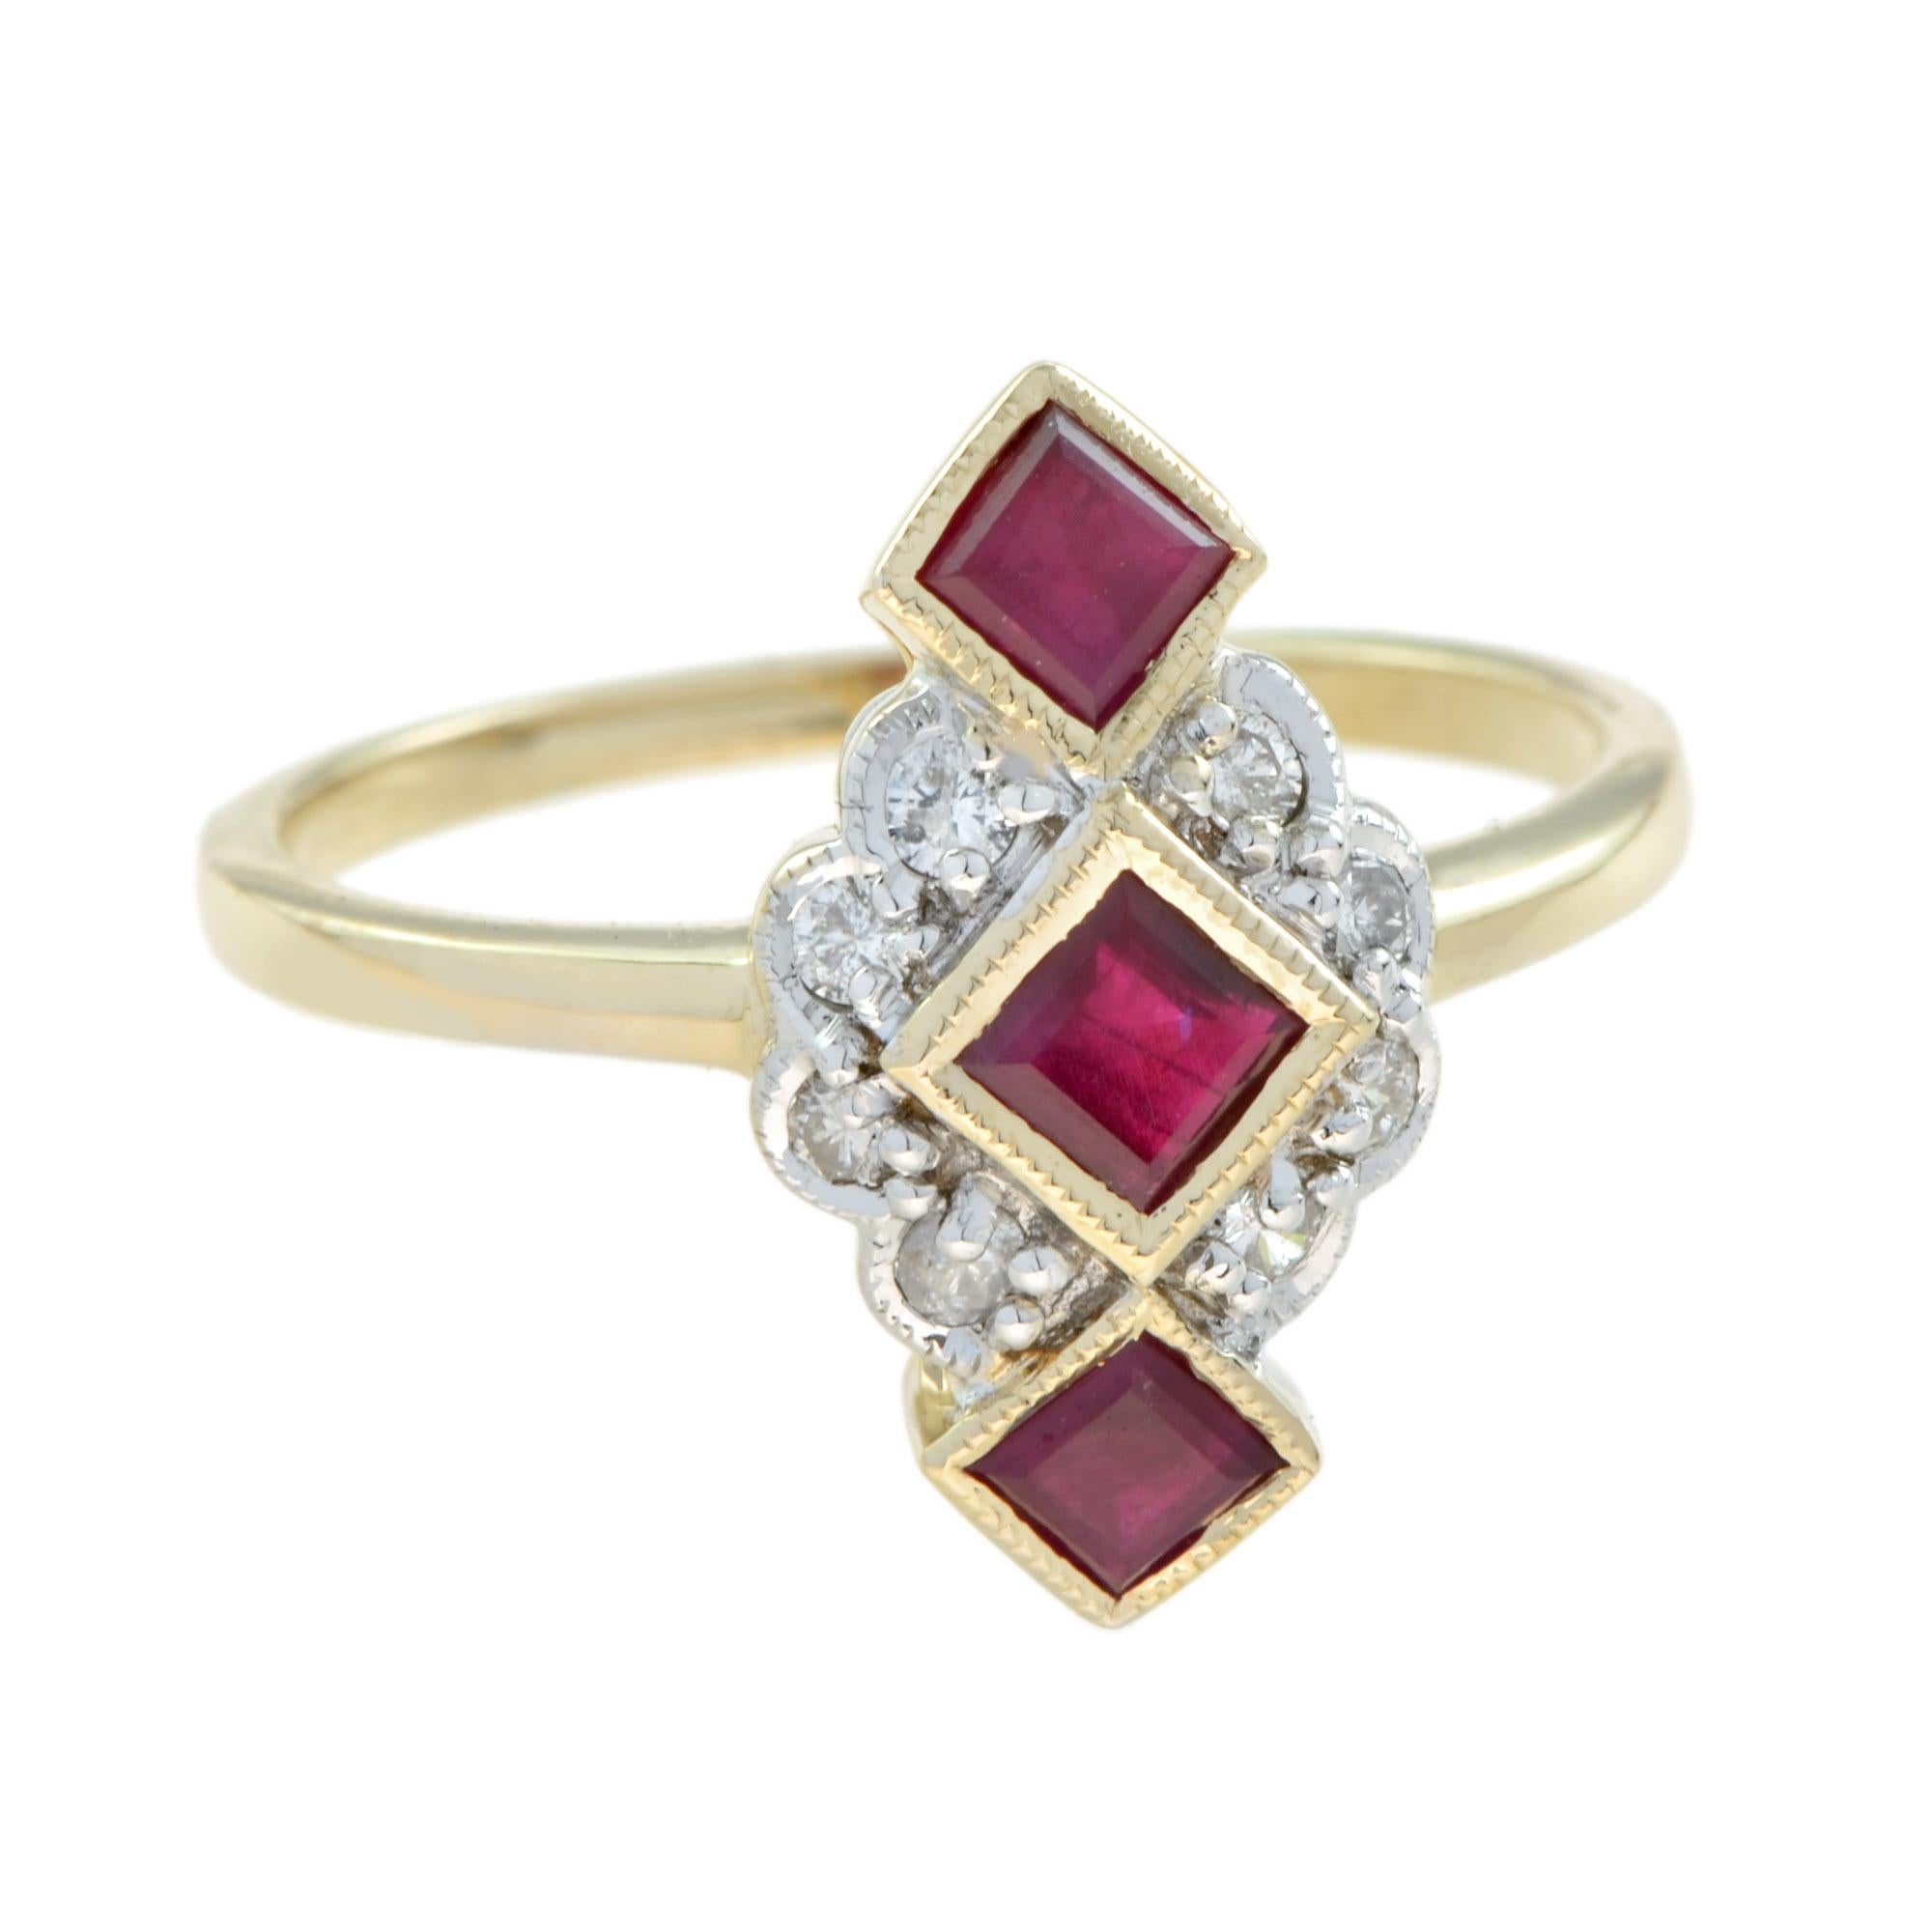 A vintage inspired Ruby and Diamond Three Stone Ring. This yellow gold ring is set vertically to the center with three square shaped rubies in bezel set surrounded by eight diamond halo at its center. 

Ring Information
Style: Art-deco
Metal: 9K